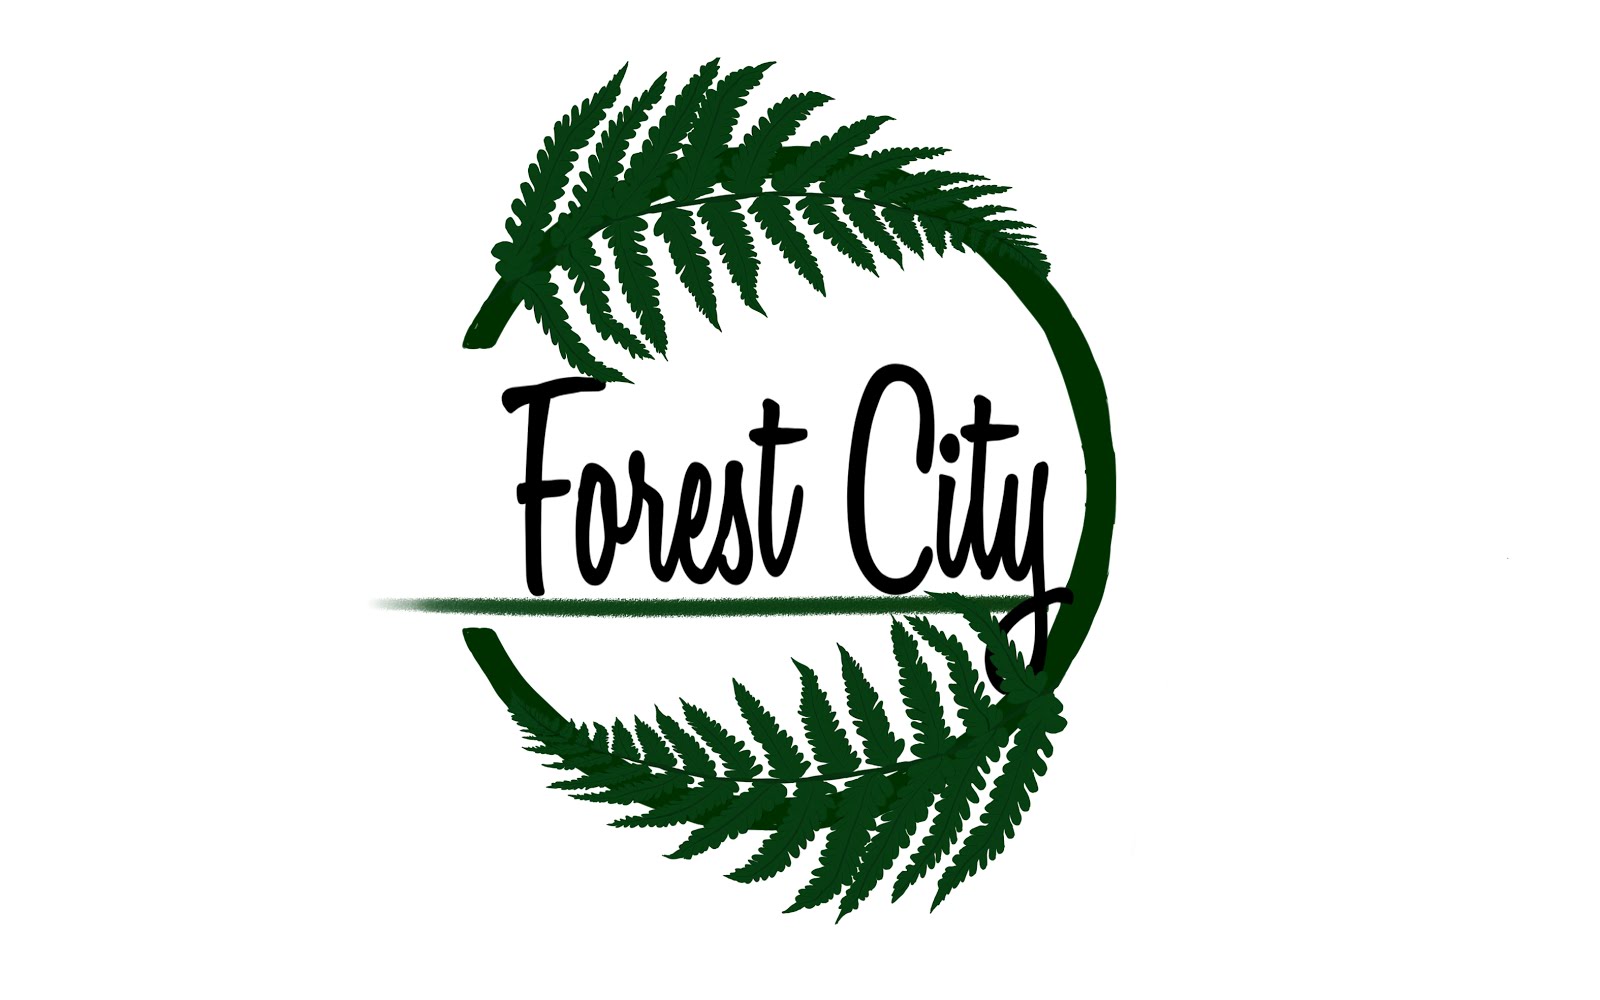 Forest City